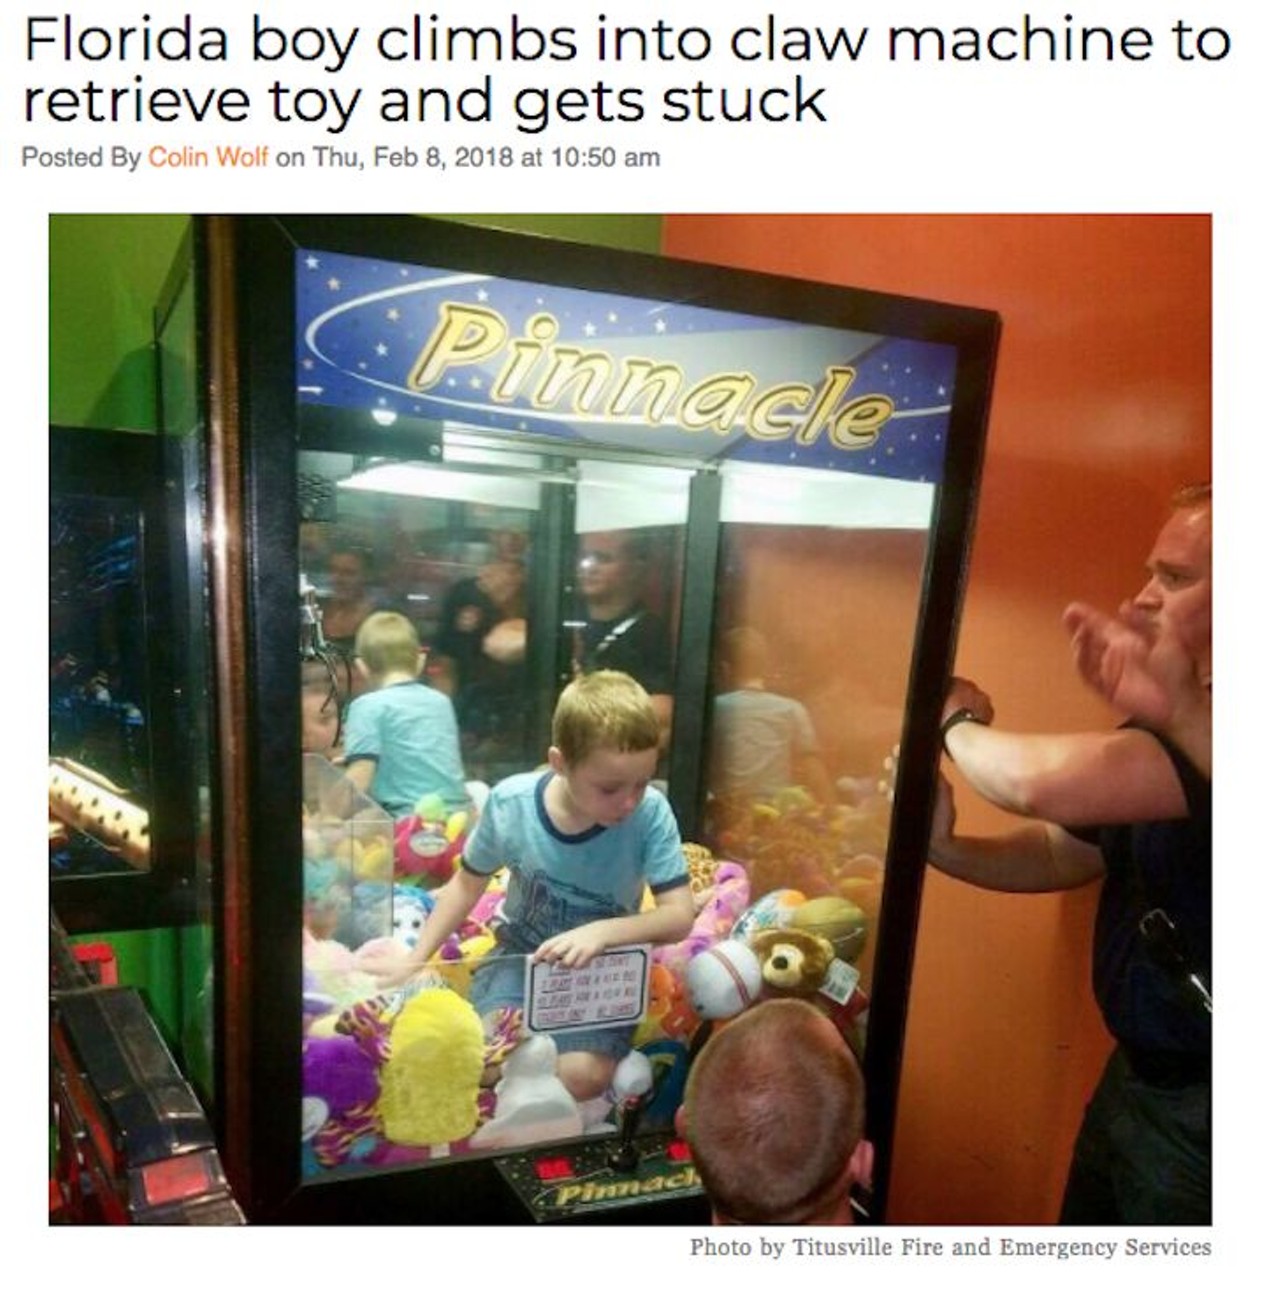 A young man from Florida found himself in a serious jam after deciding to climb into a claw machine to get a stuffed animal. Read more here.